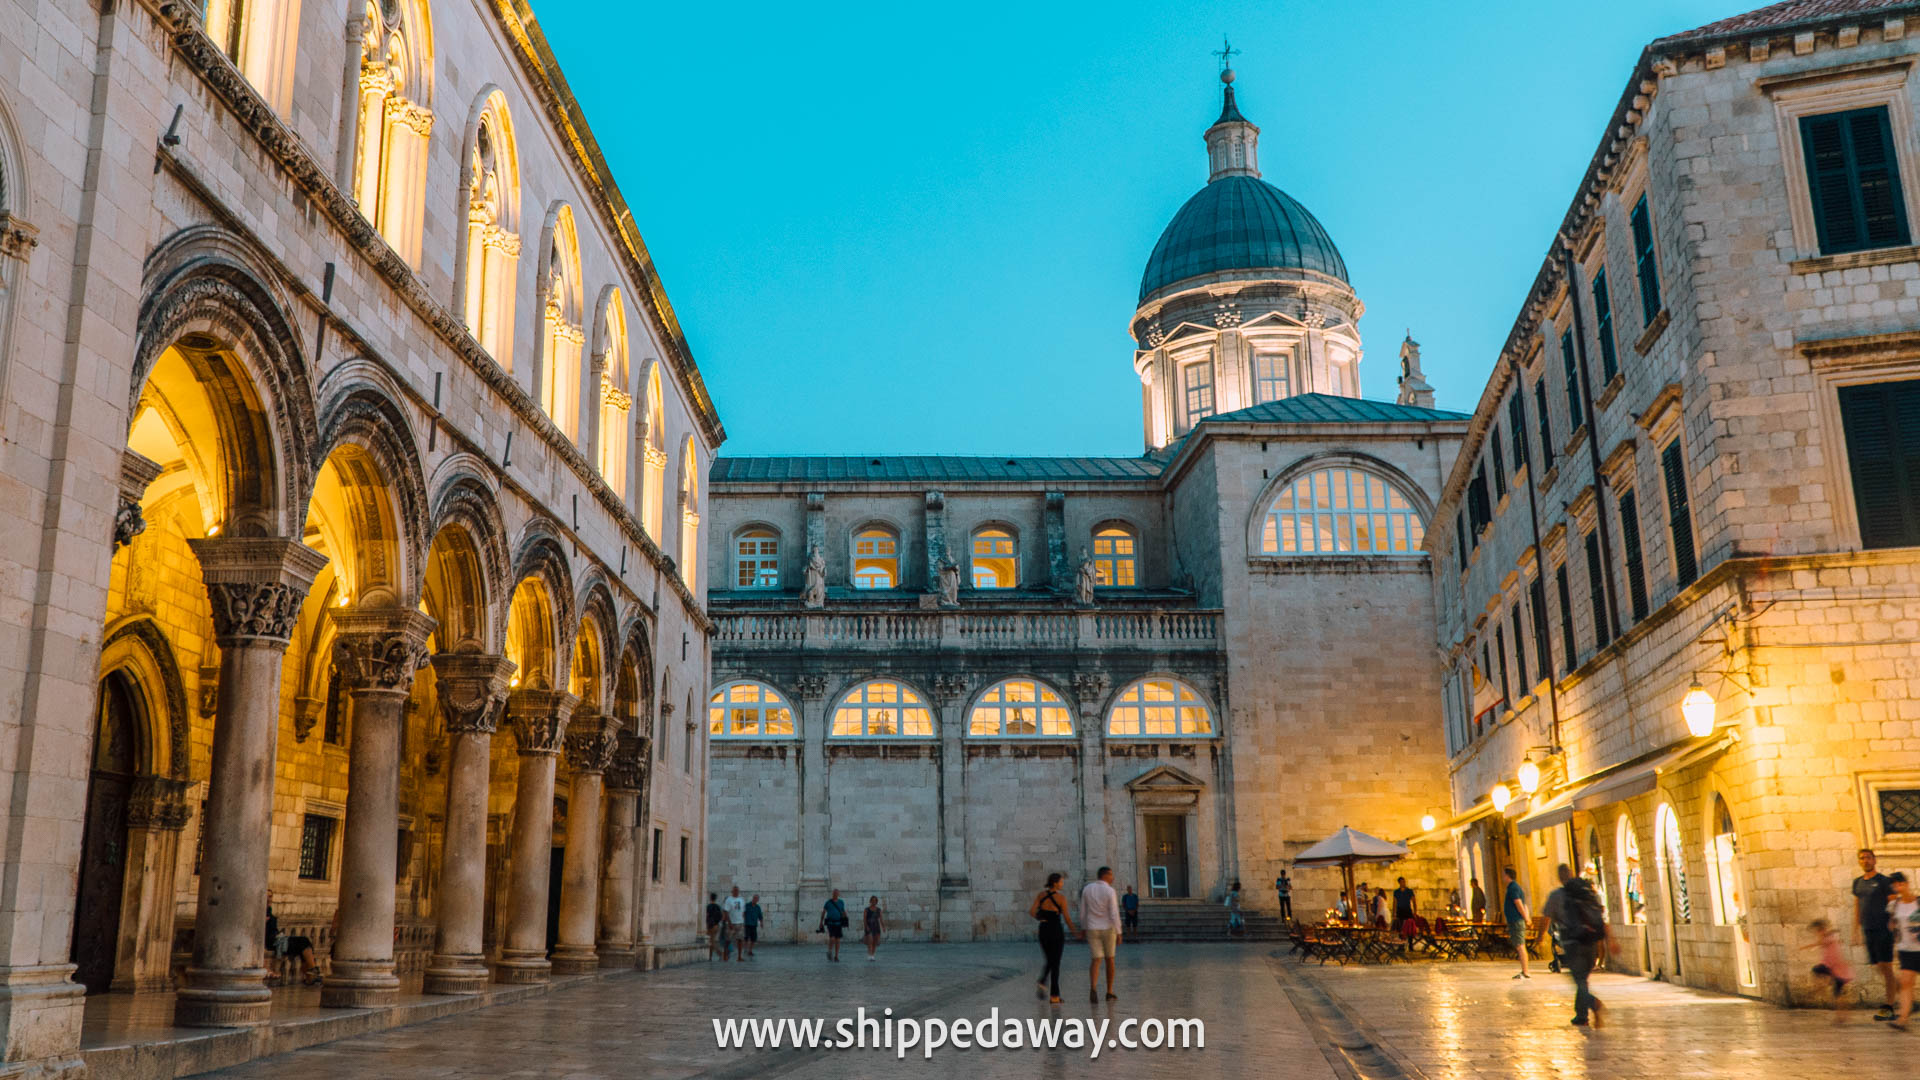 Where to stay in Dubrovnik - Best Dubrovnik Hotels - Best areas to stay in Dubrovnik - Where to stay in Dubrovnik on a budget - Best Dubrovnik resorts - Is it worth staying in Dubrovnik Old Town?